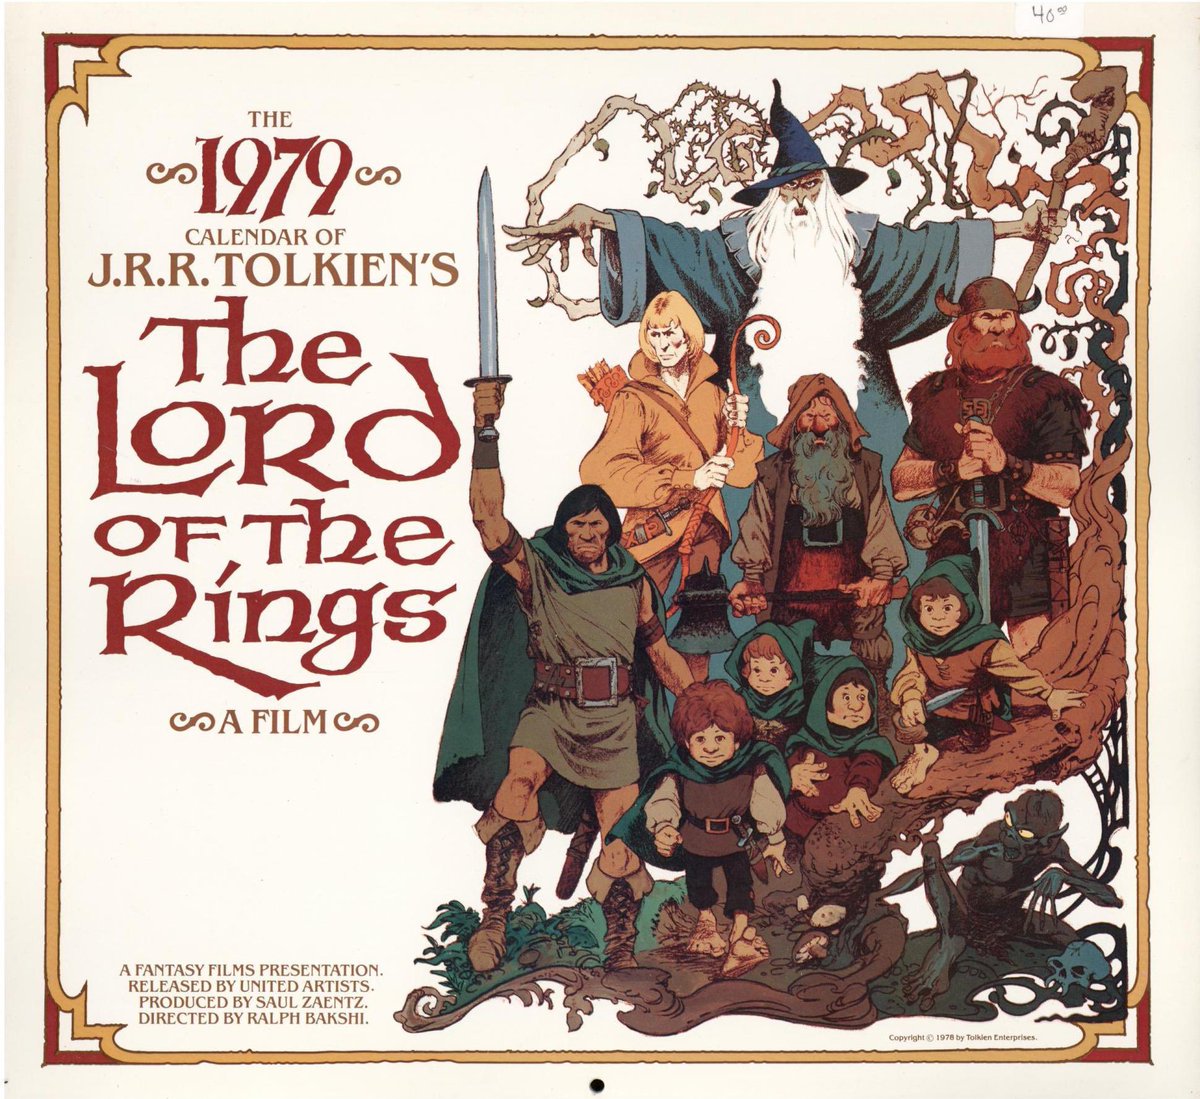 Art for the 1979 ‘Lord of the Rings’ cartoon calendar film - art by Mike Ploog in 1978